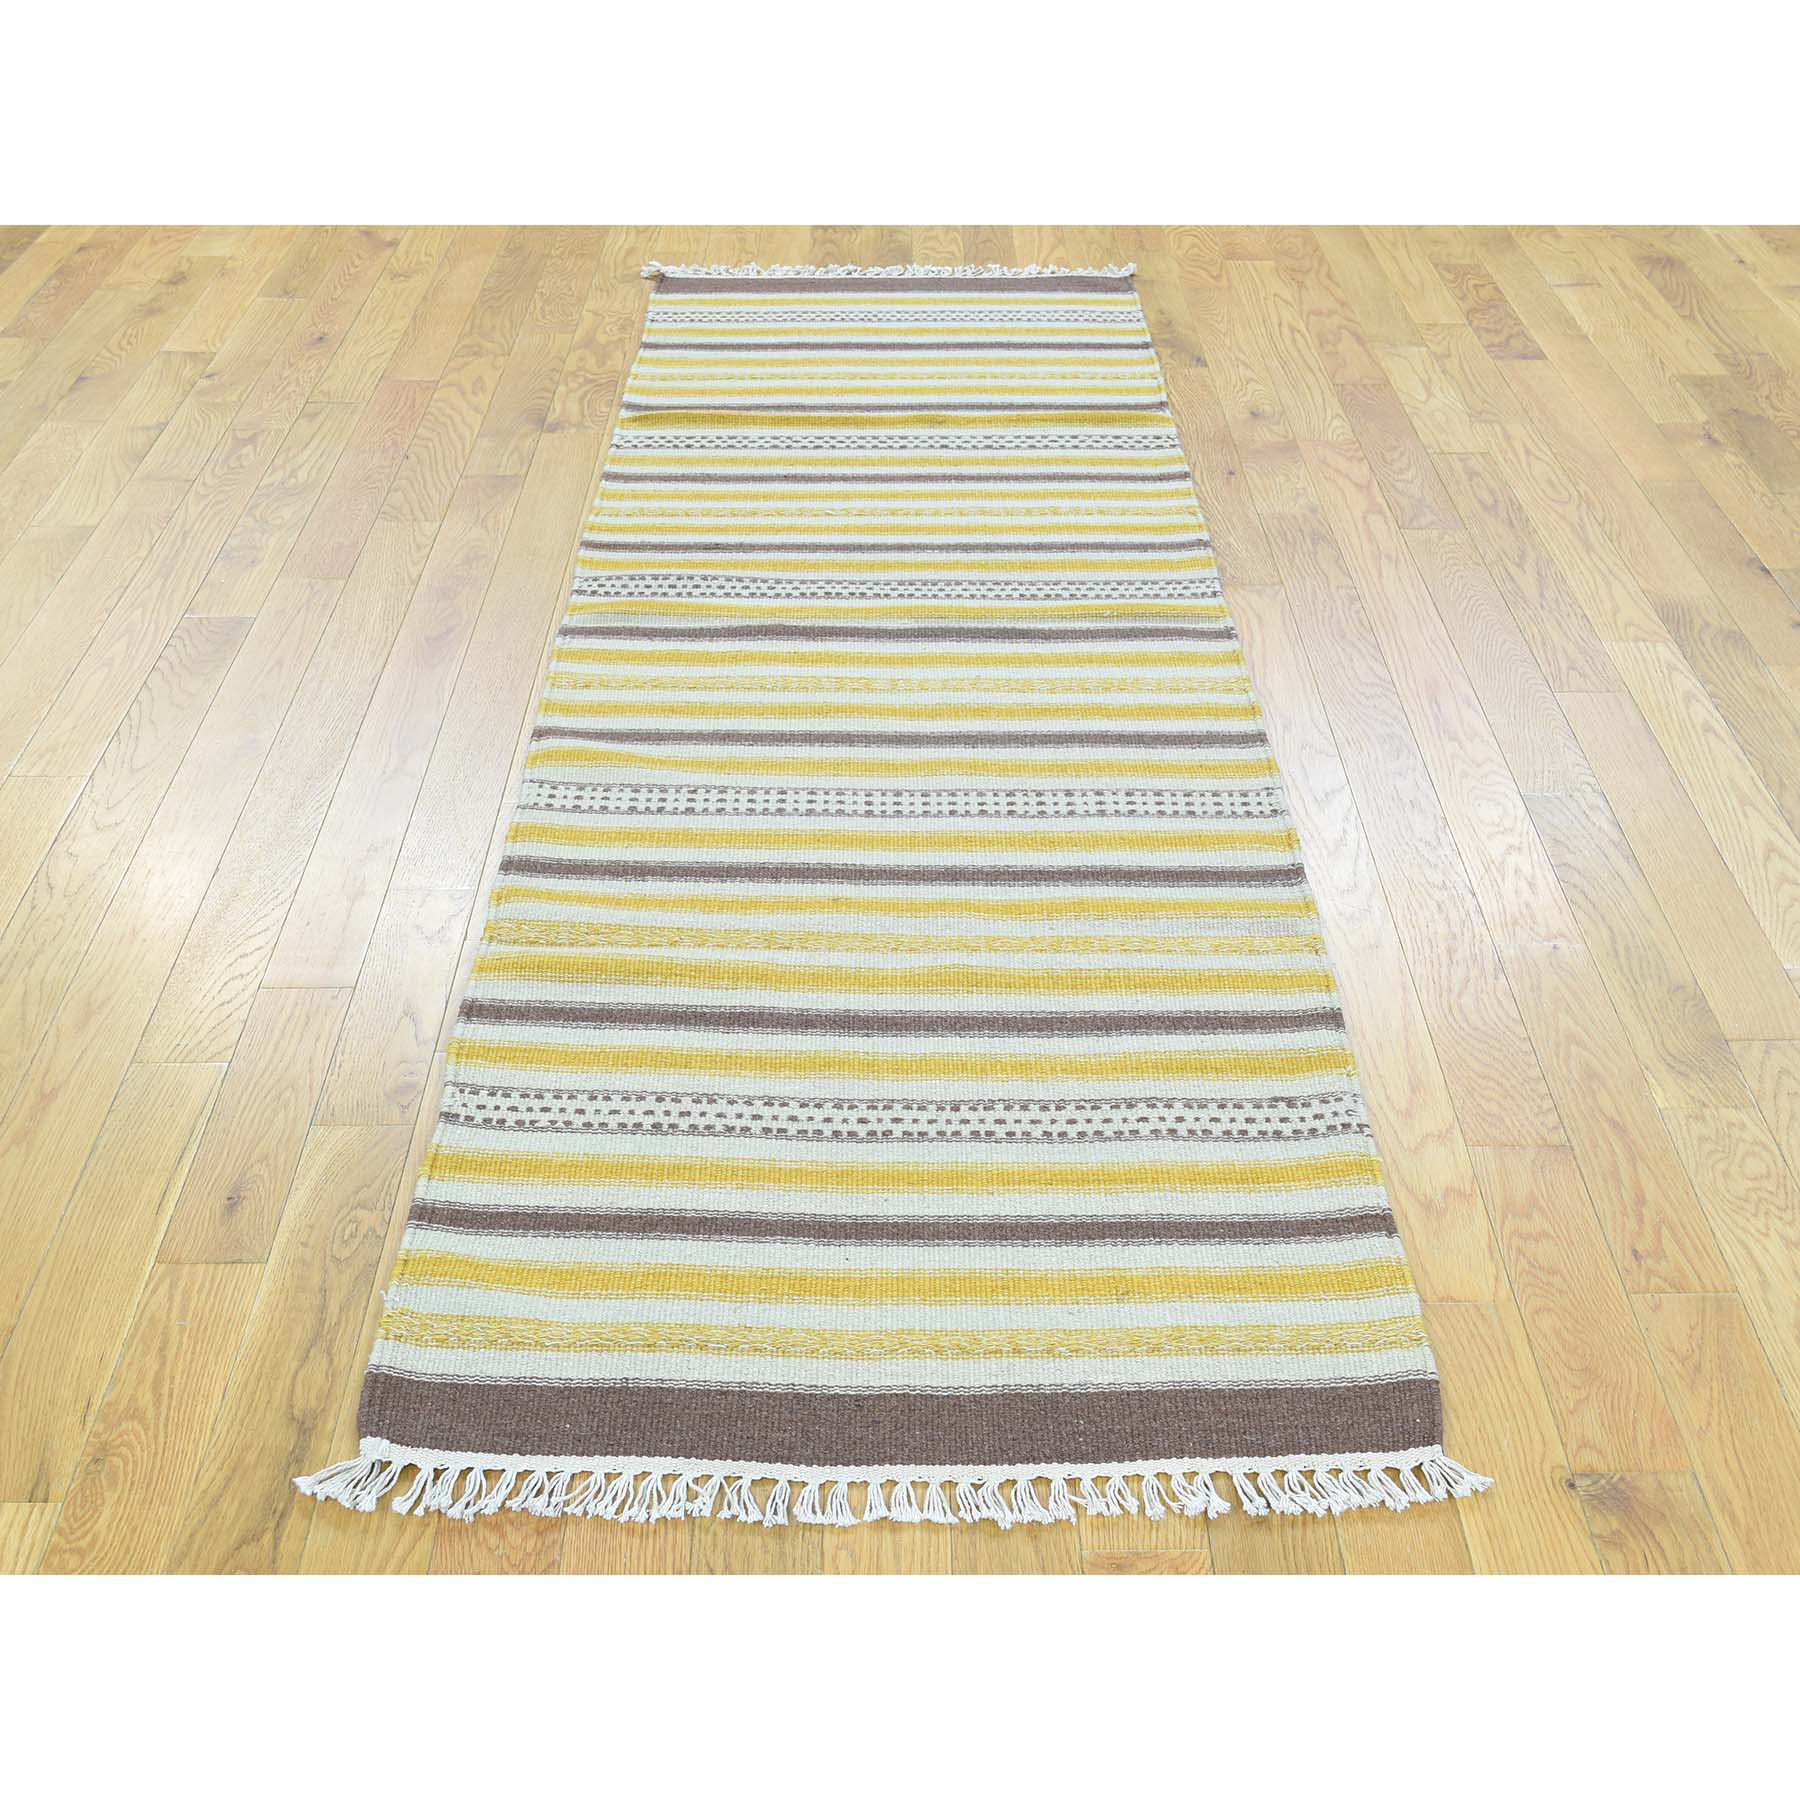 2'5"x8' Hand-Woven Pure Wool Flat Weave Striped Durie Kilim Runner Rug 